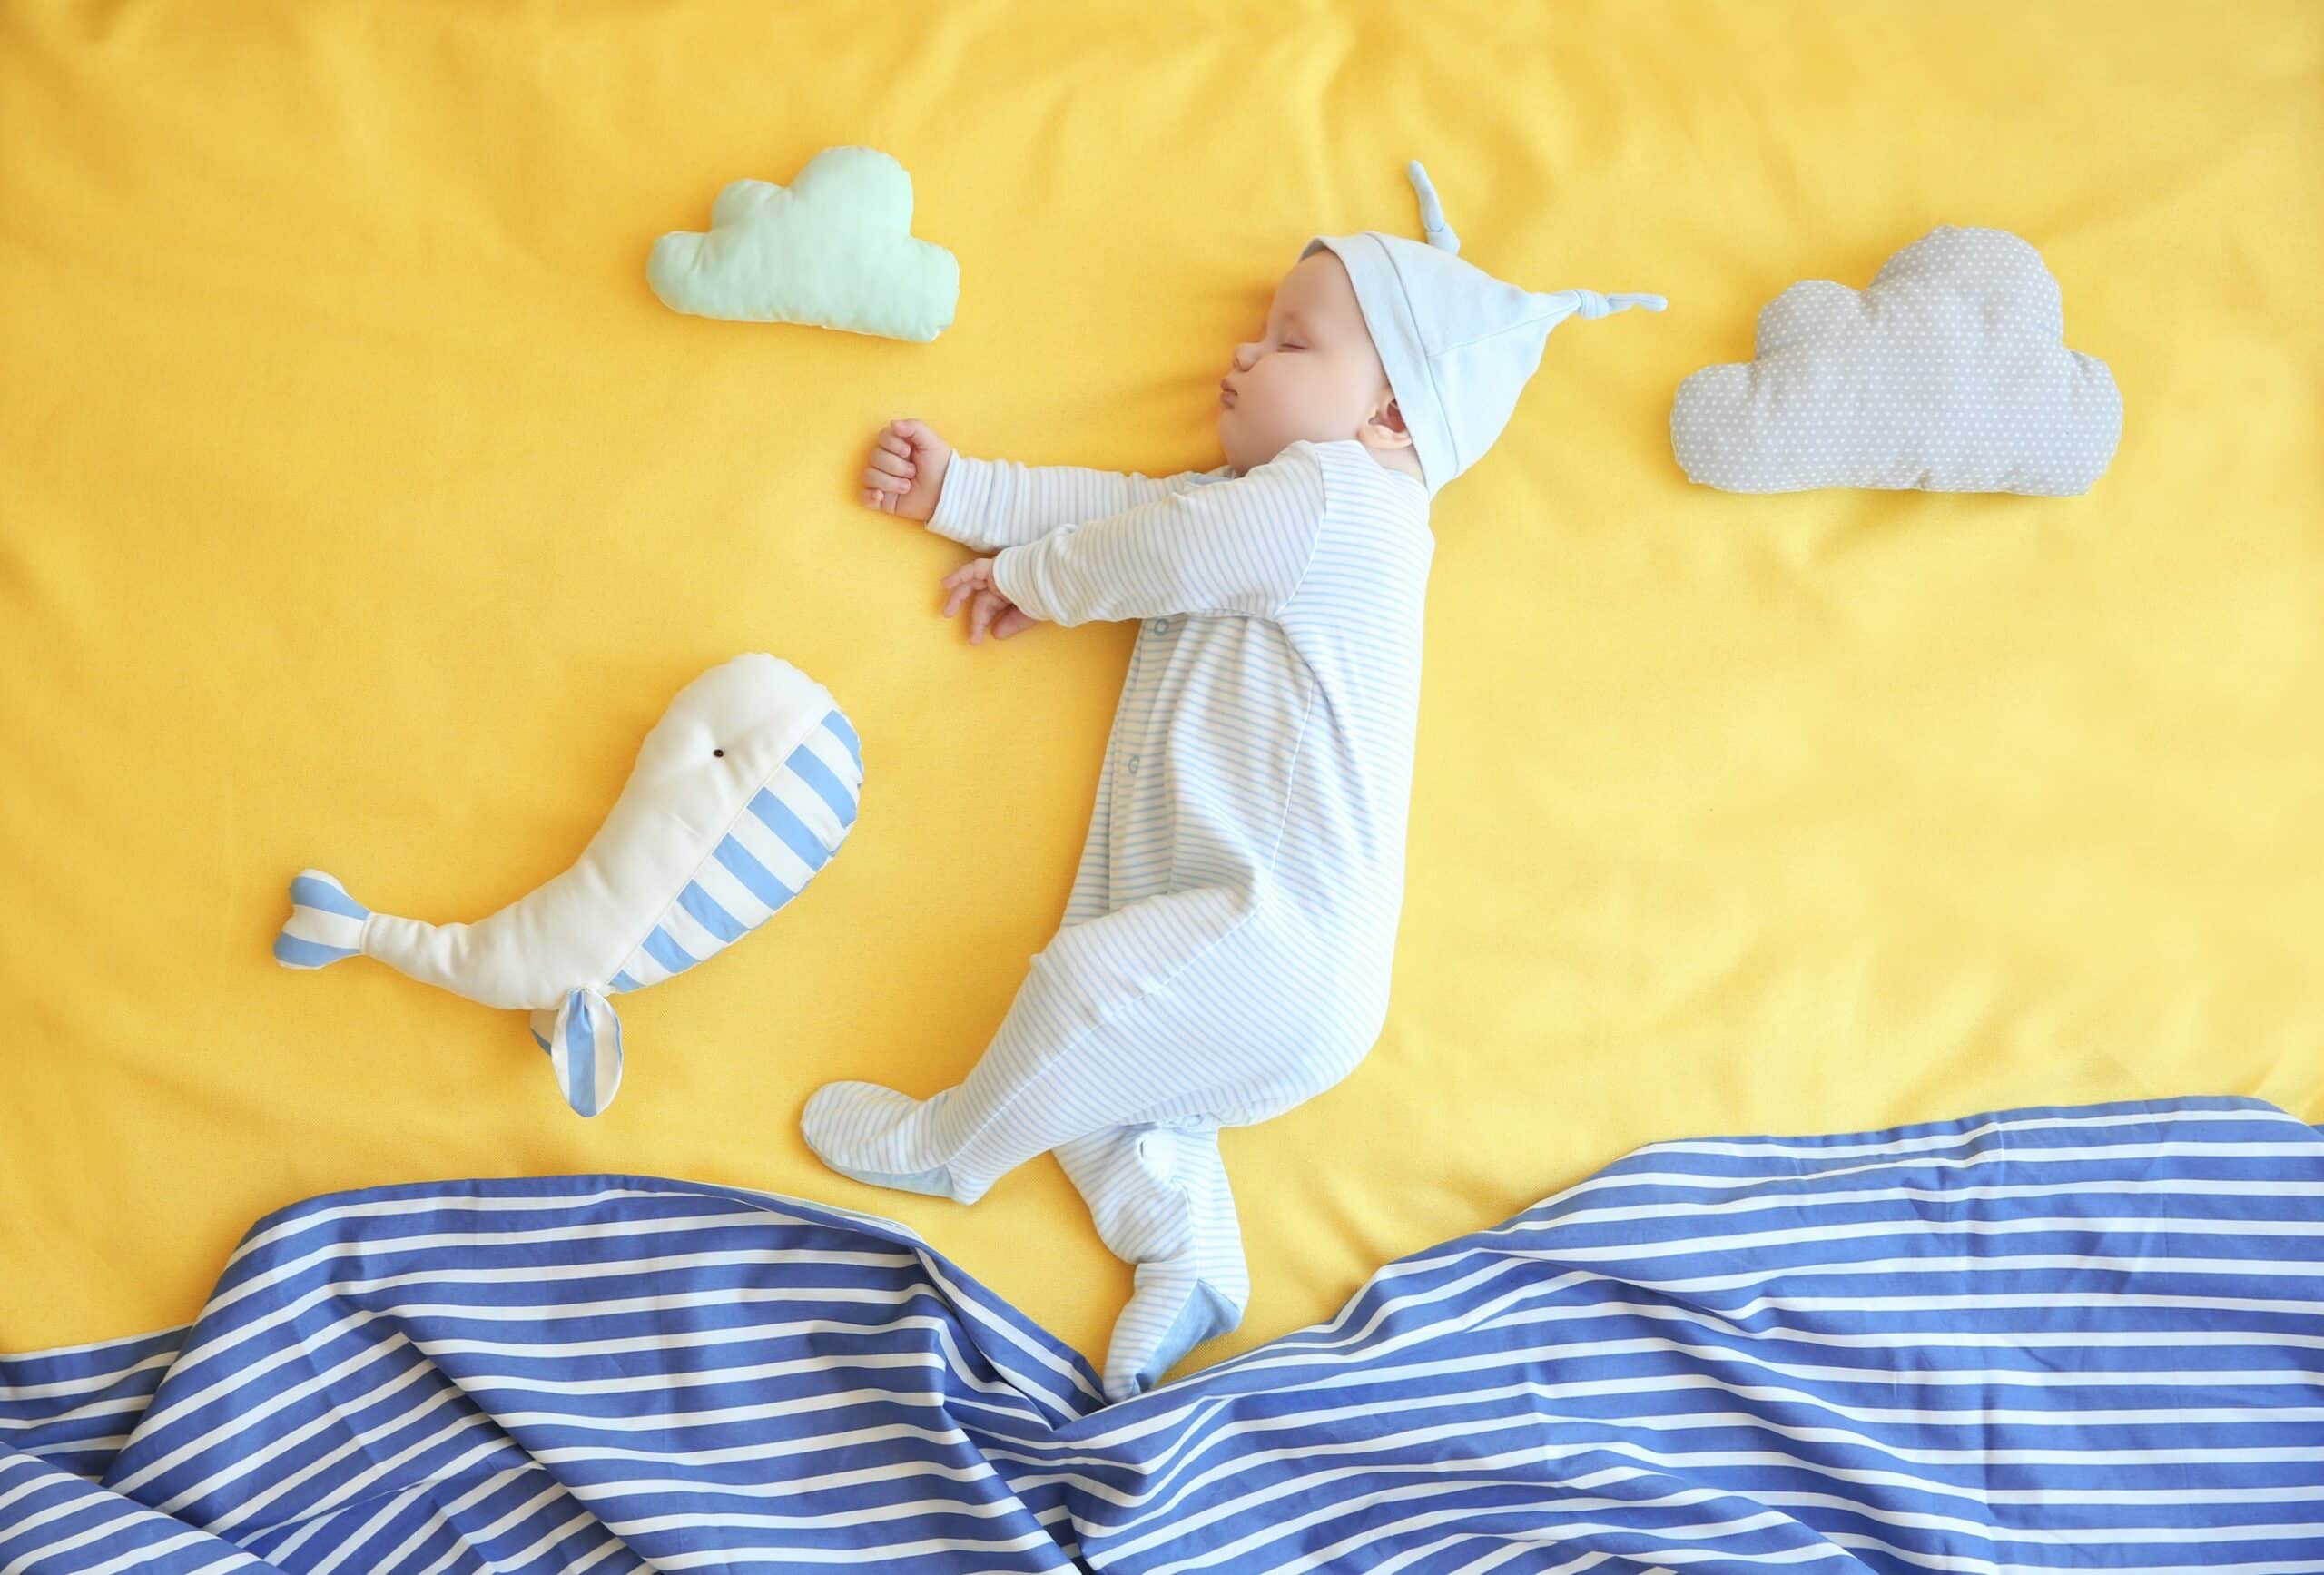 Cute,Little,Baby,With,Toys,Sleeping,On,Bed,At,Home